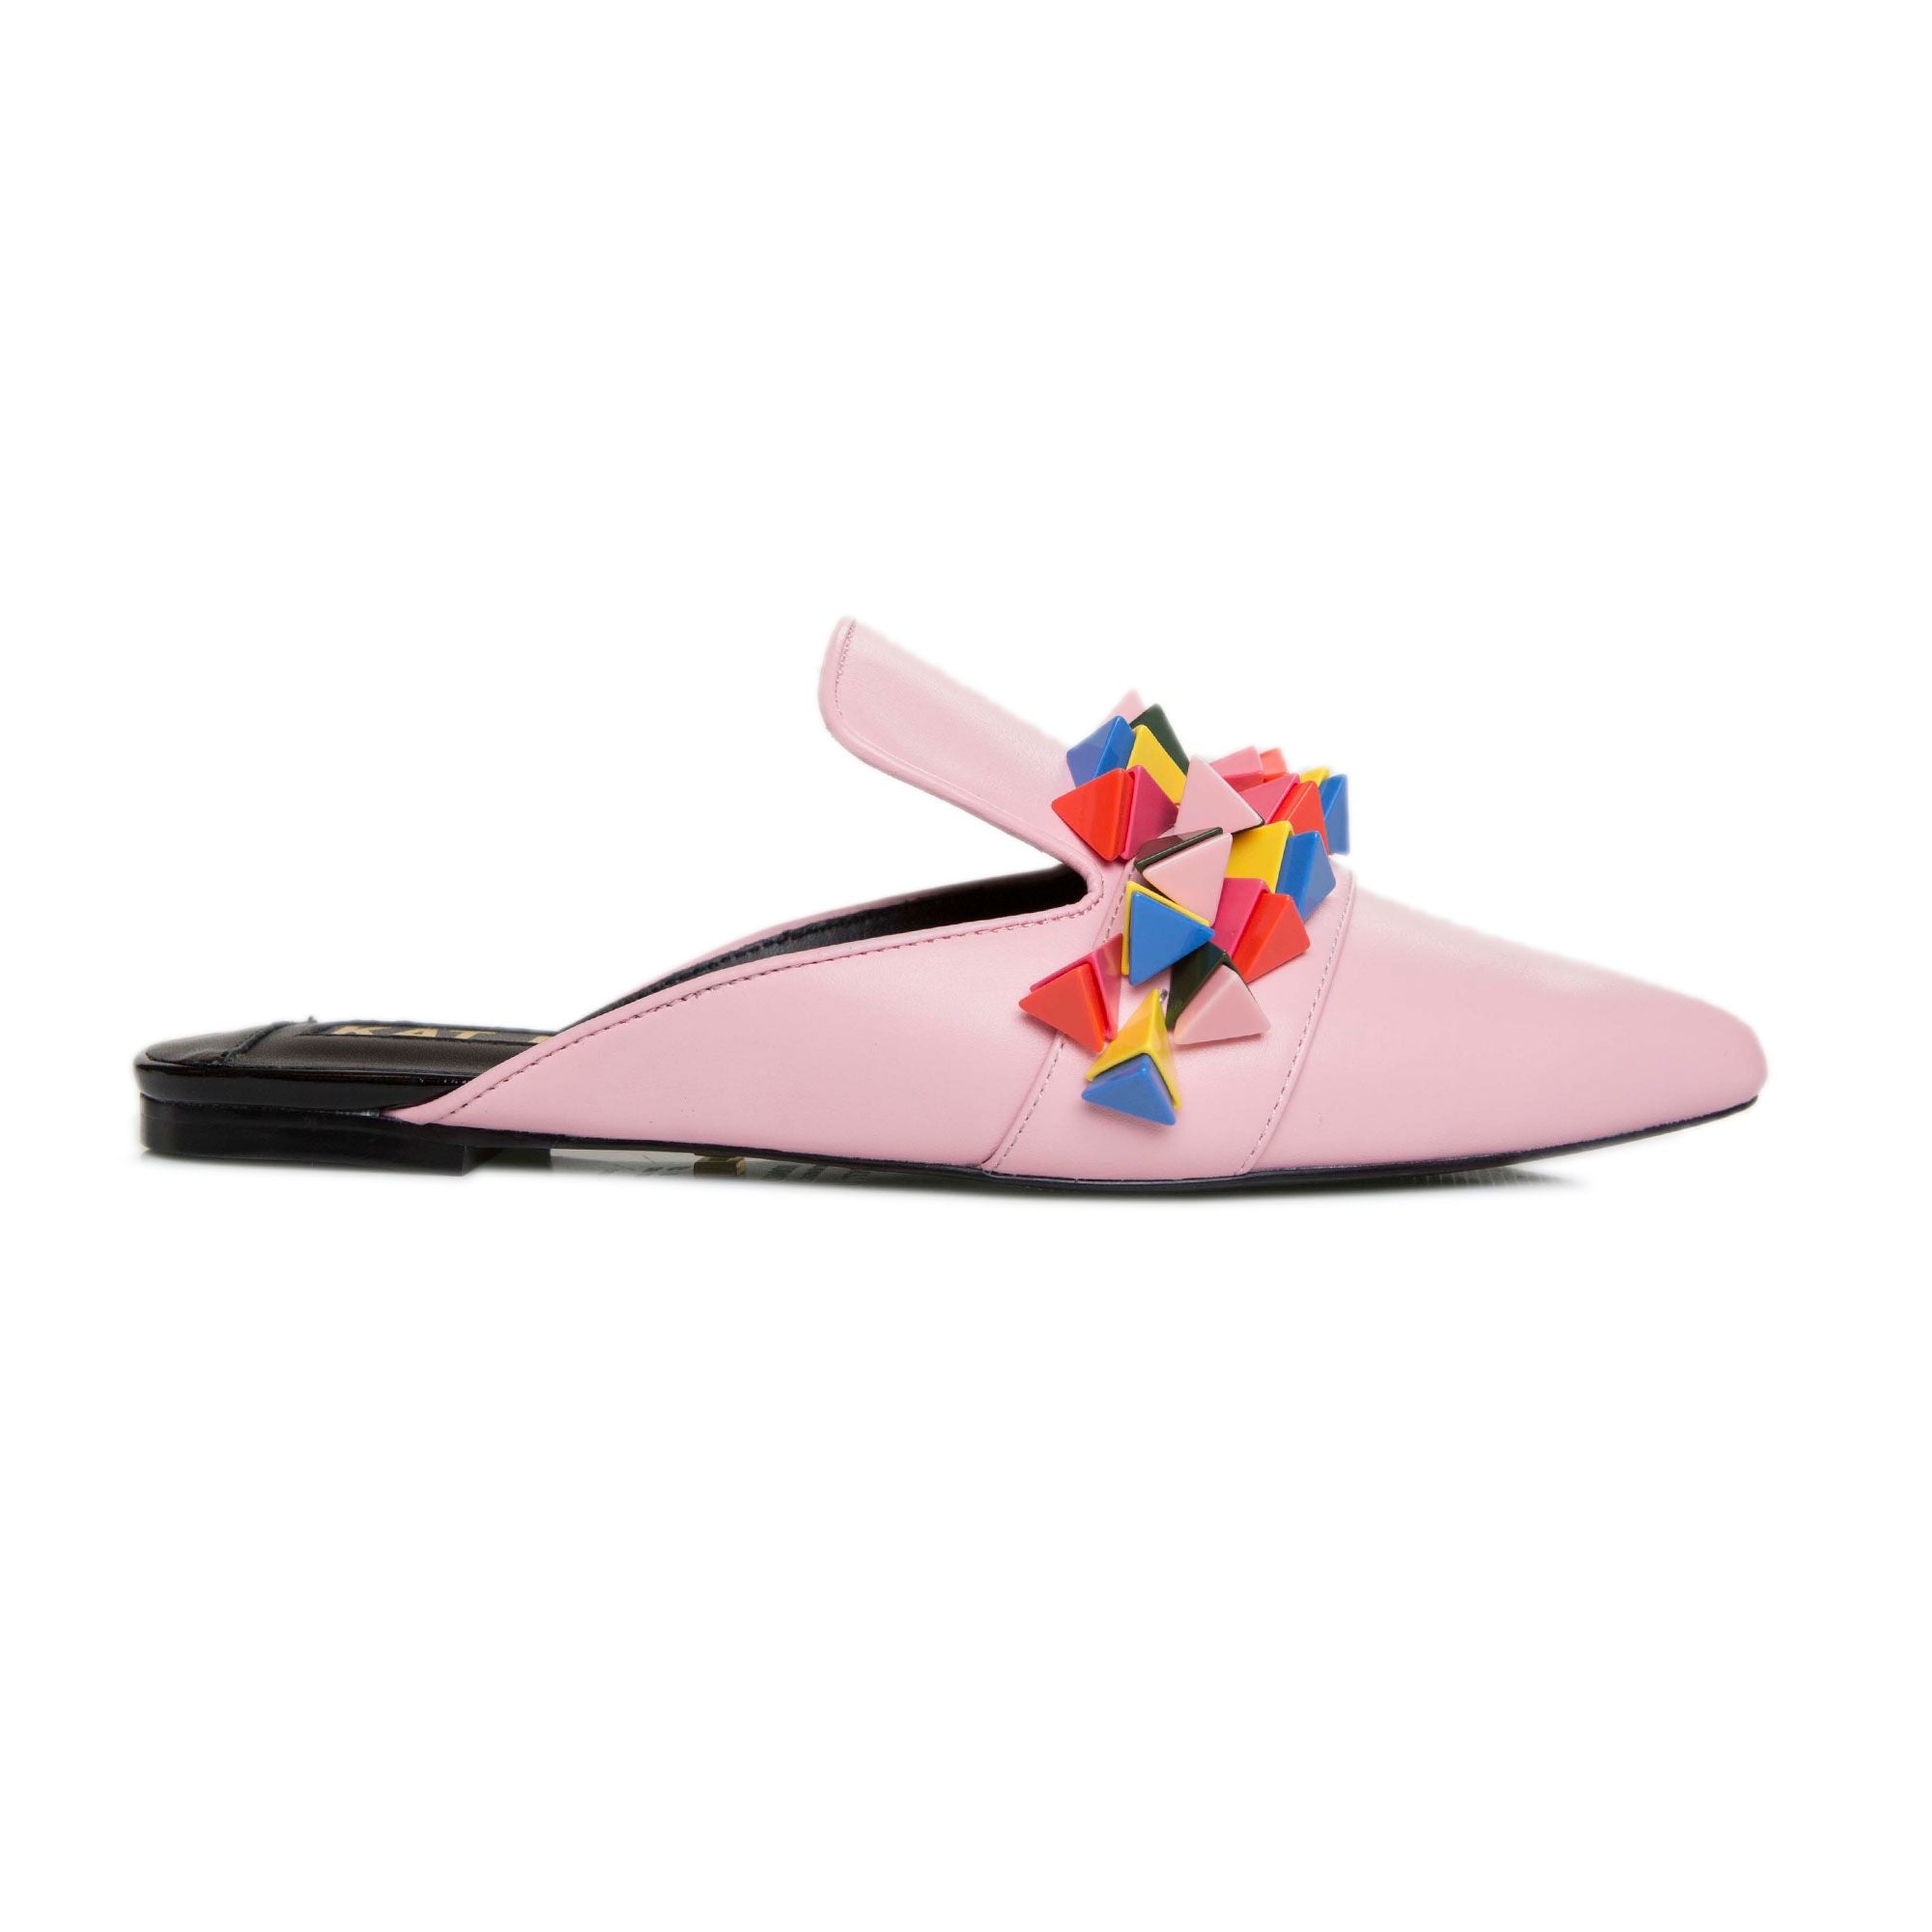 Outer side view of the kat maconie issa mule. This slip on mule is pink with multicolored tiny pyramid shaped decorations on the upper. The shoe has a pointed toe.